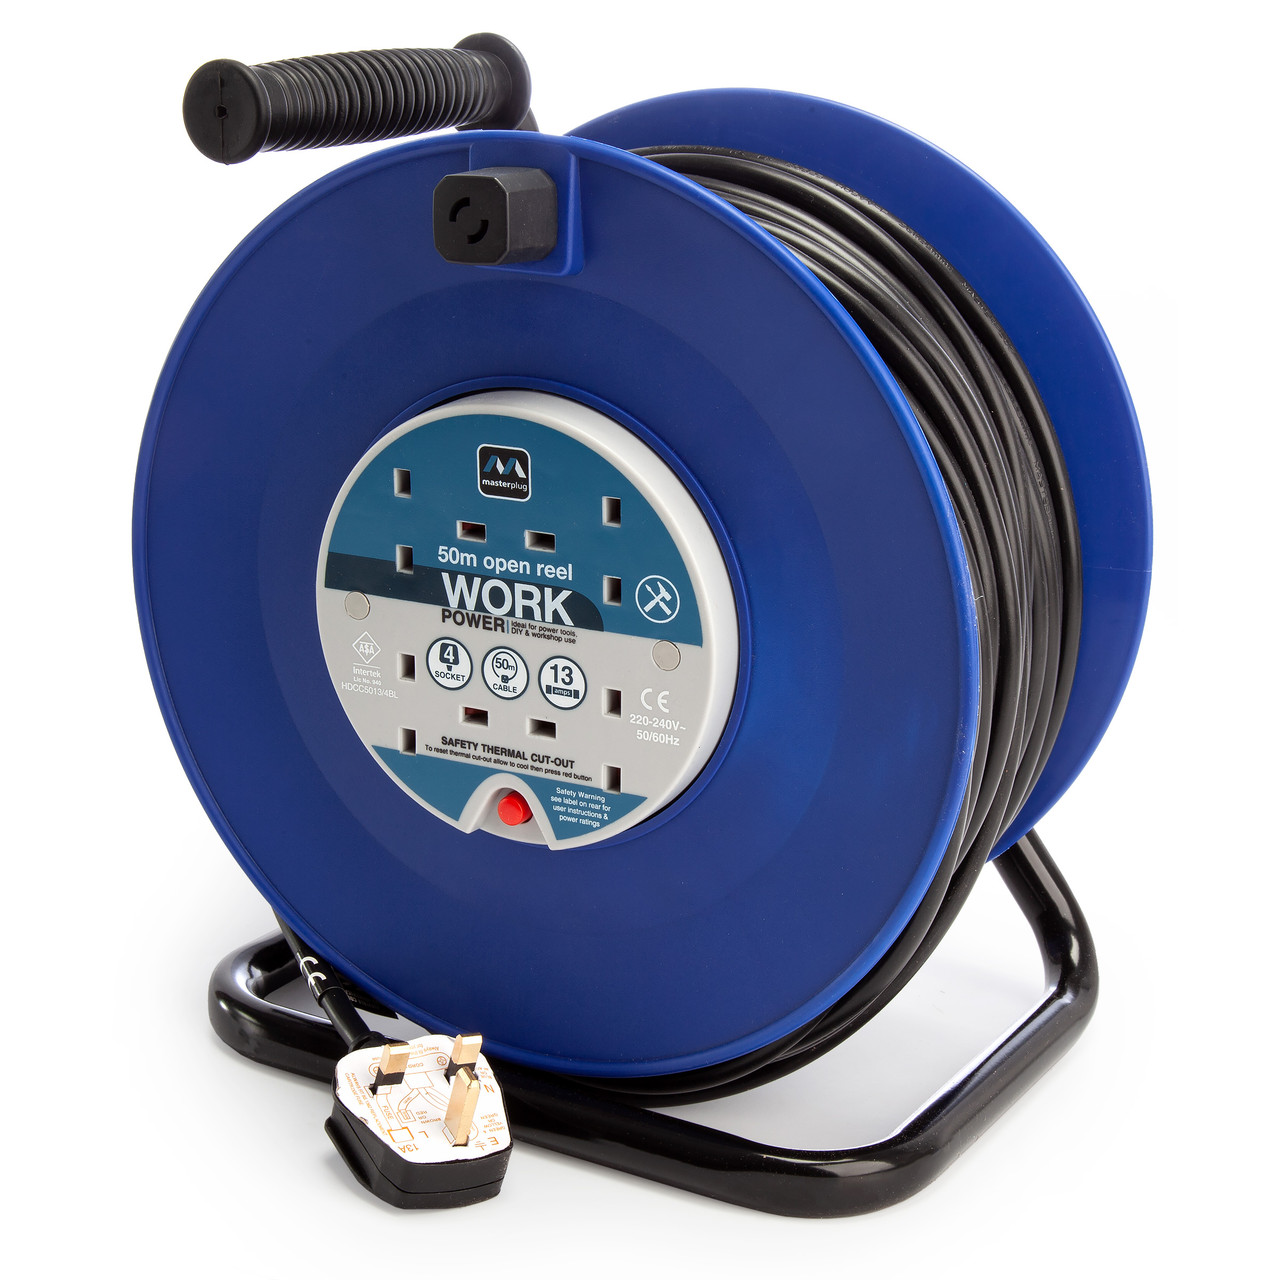 Photos - Cable (video, audio, USB) Masterplug HDCC5013-4BL-MP 13A 4 Gang Open Reel Blue 50 Metres 240V 